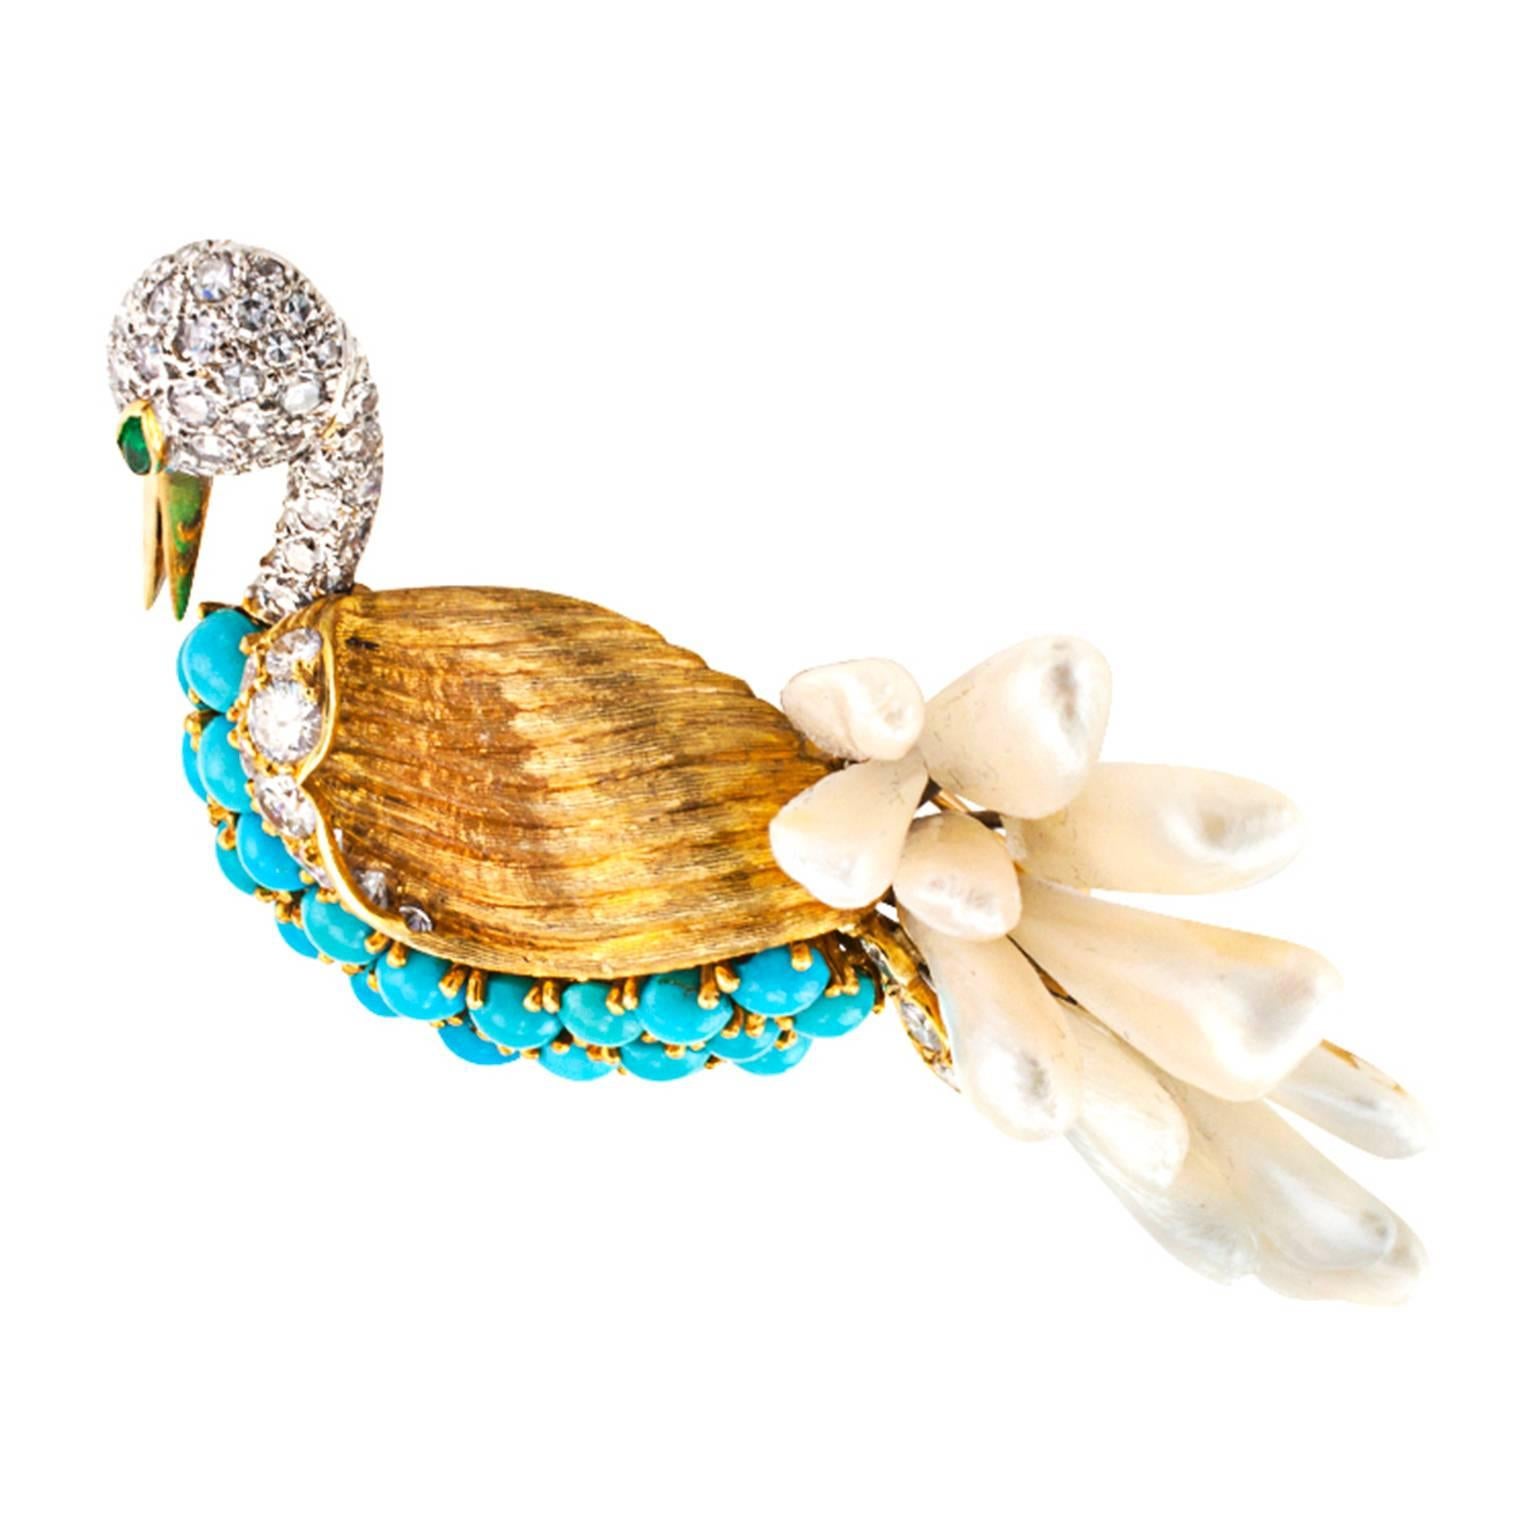 Swan Brooch Handcrafted with Petal Pearls Turquoise and Diamonds

To quote from Funny Girl, 